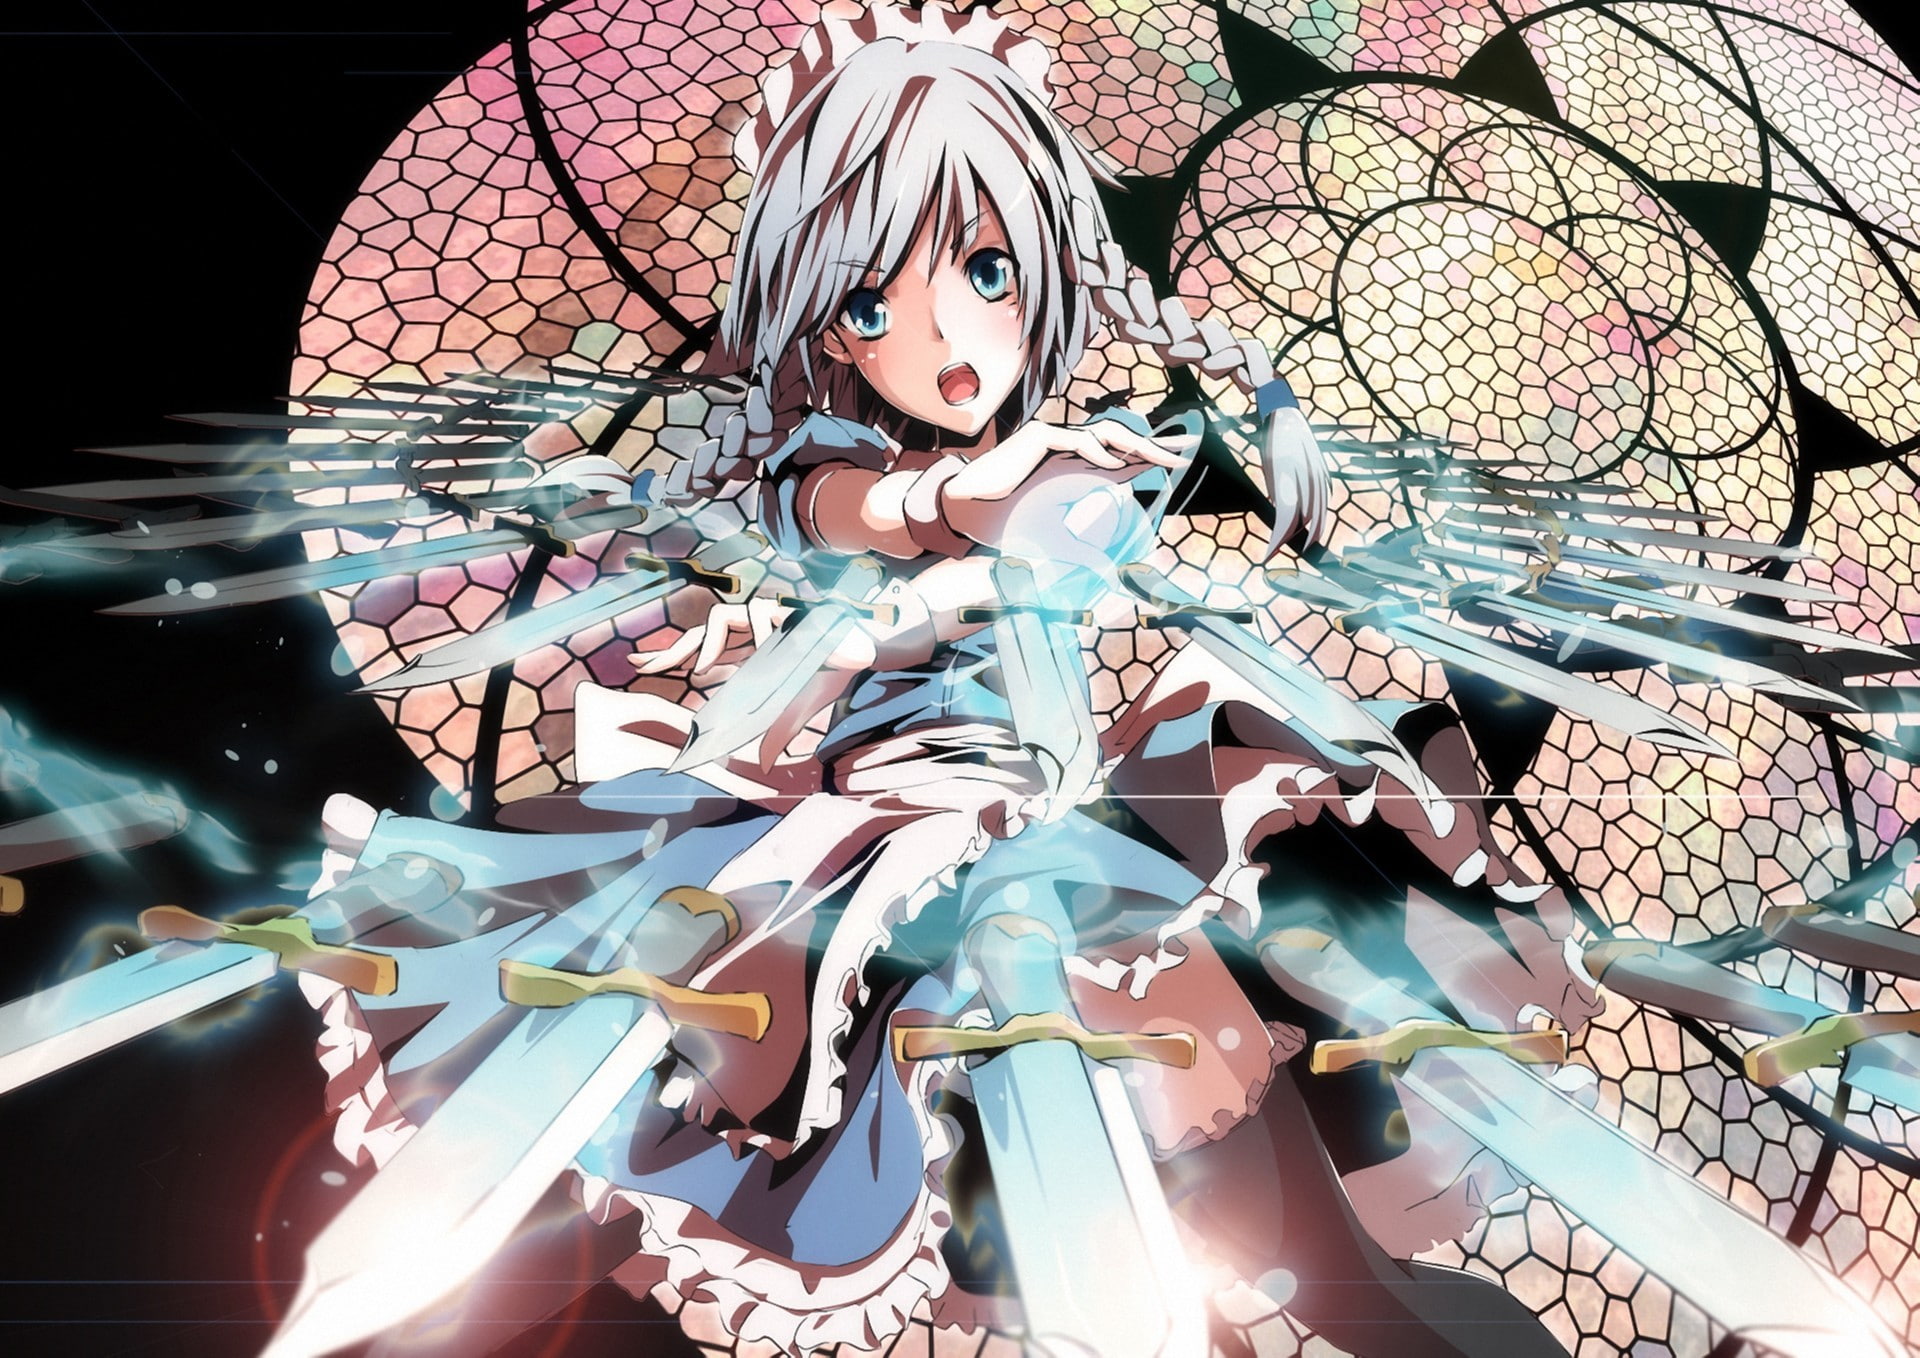 white-haired female anime character illustration, girl, weapons